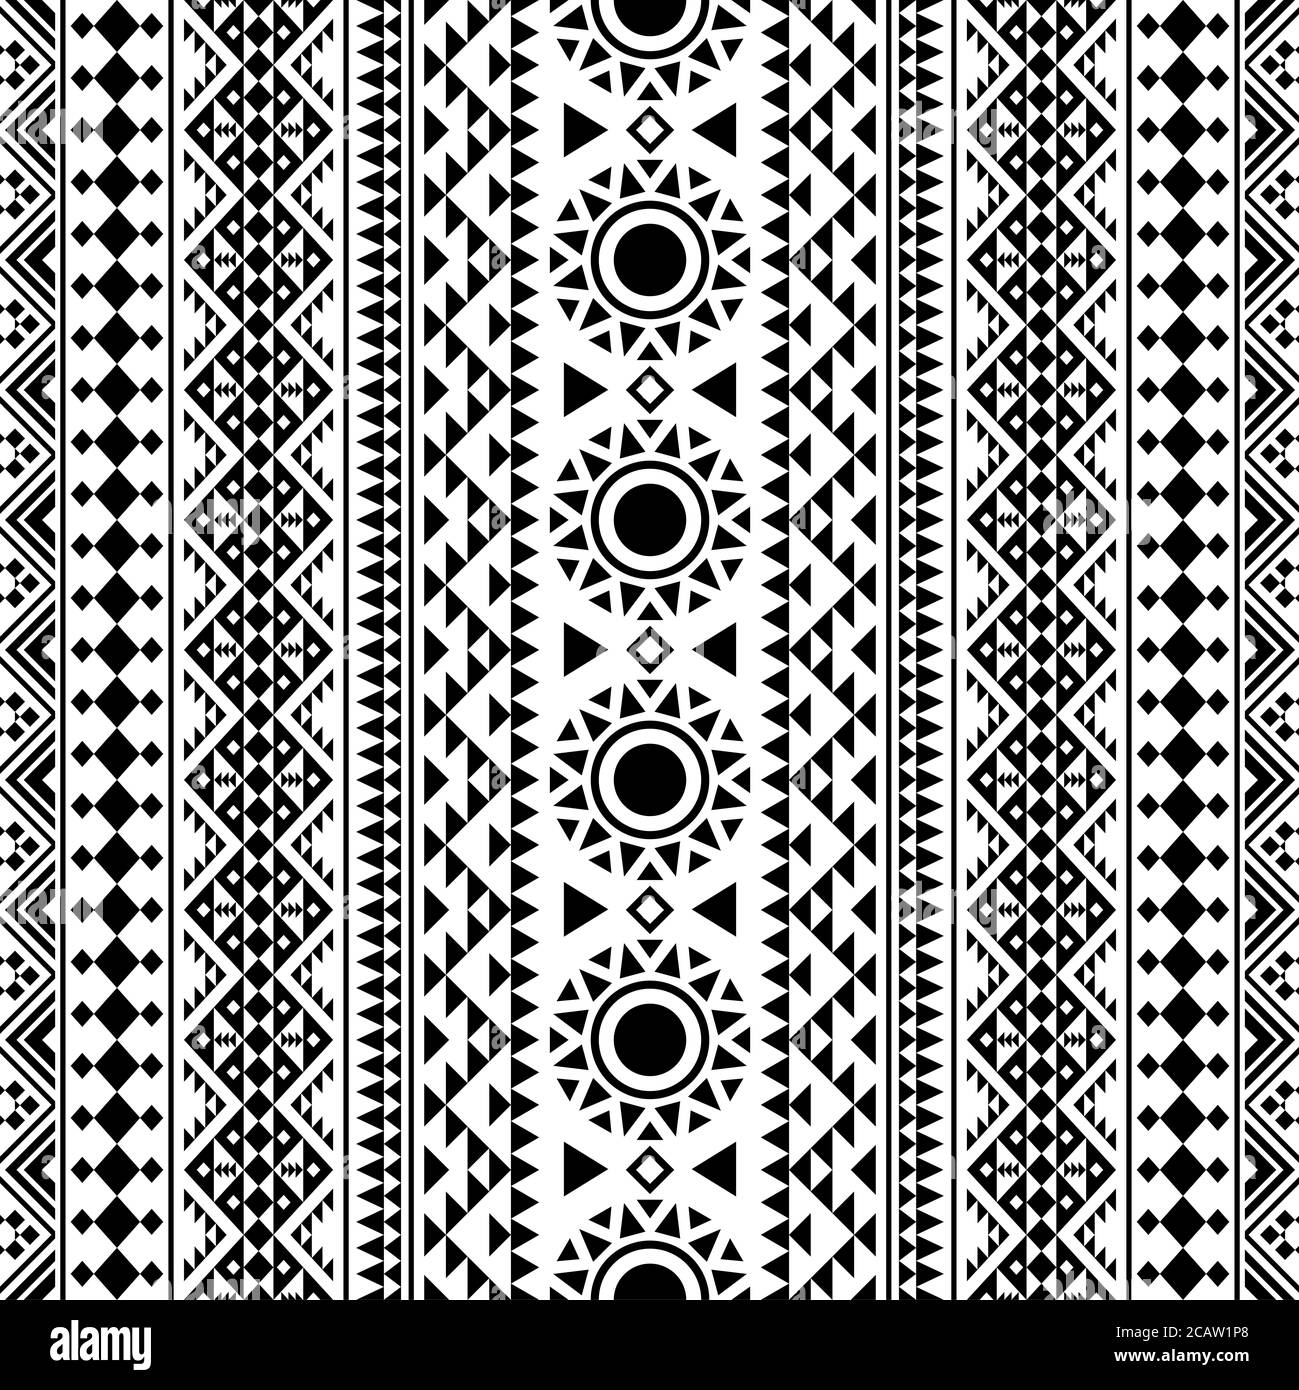 Ethnic seamless pattern tribal style texture background in black and ...